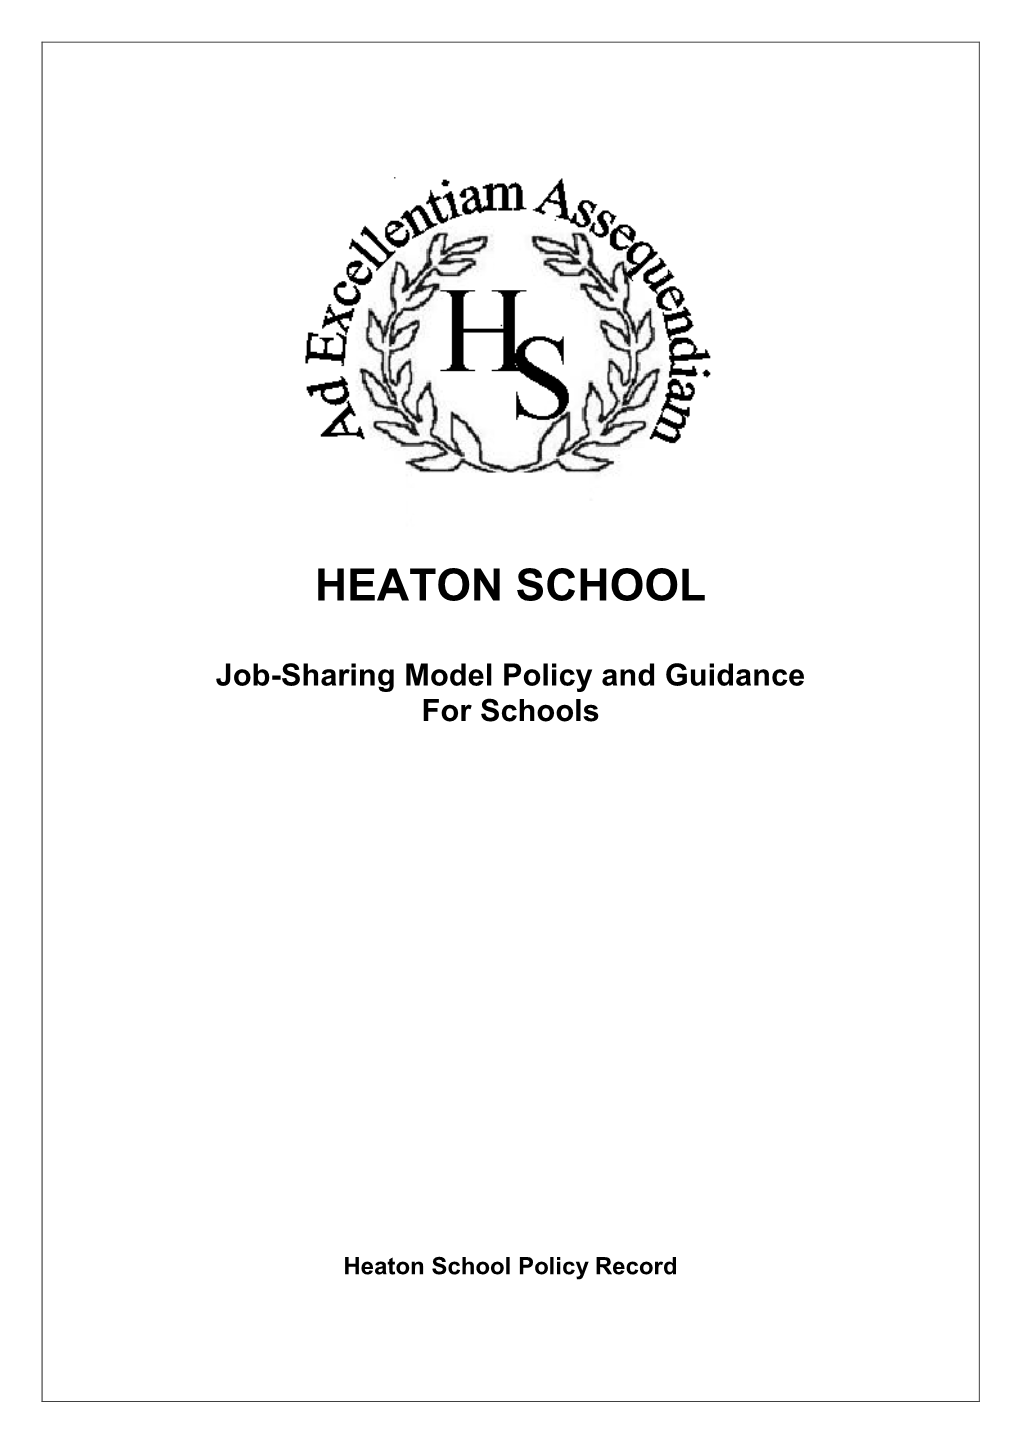 Job-Sharing Model Policy and Guidance for Schools